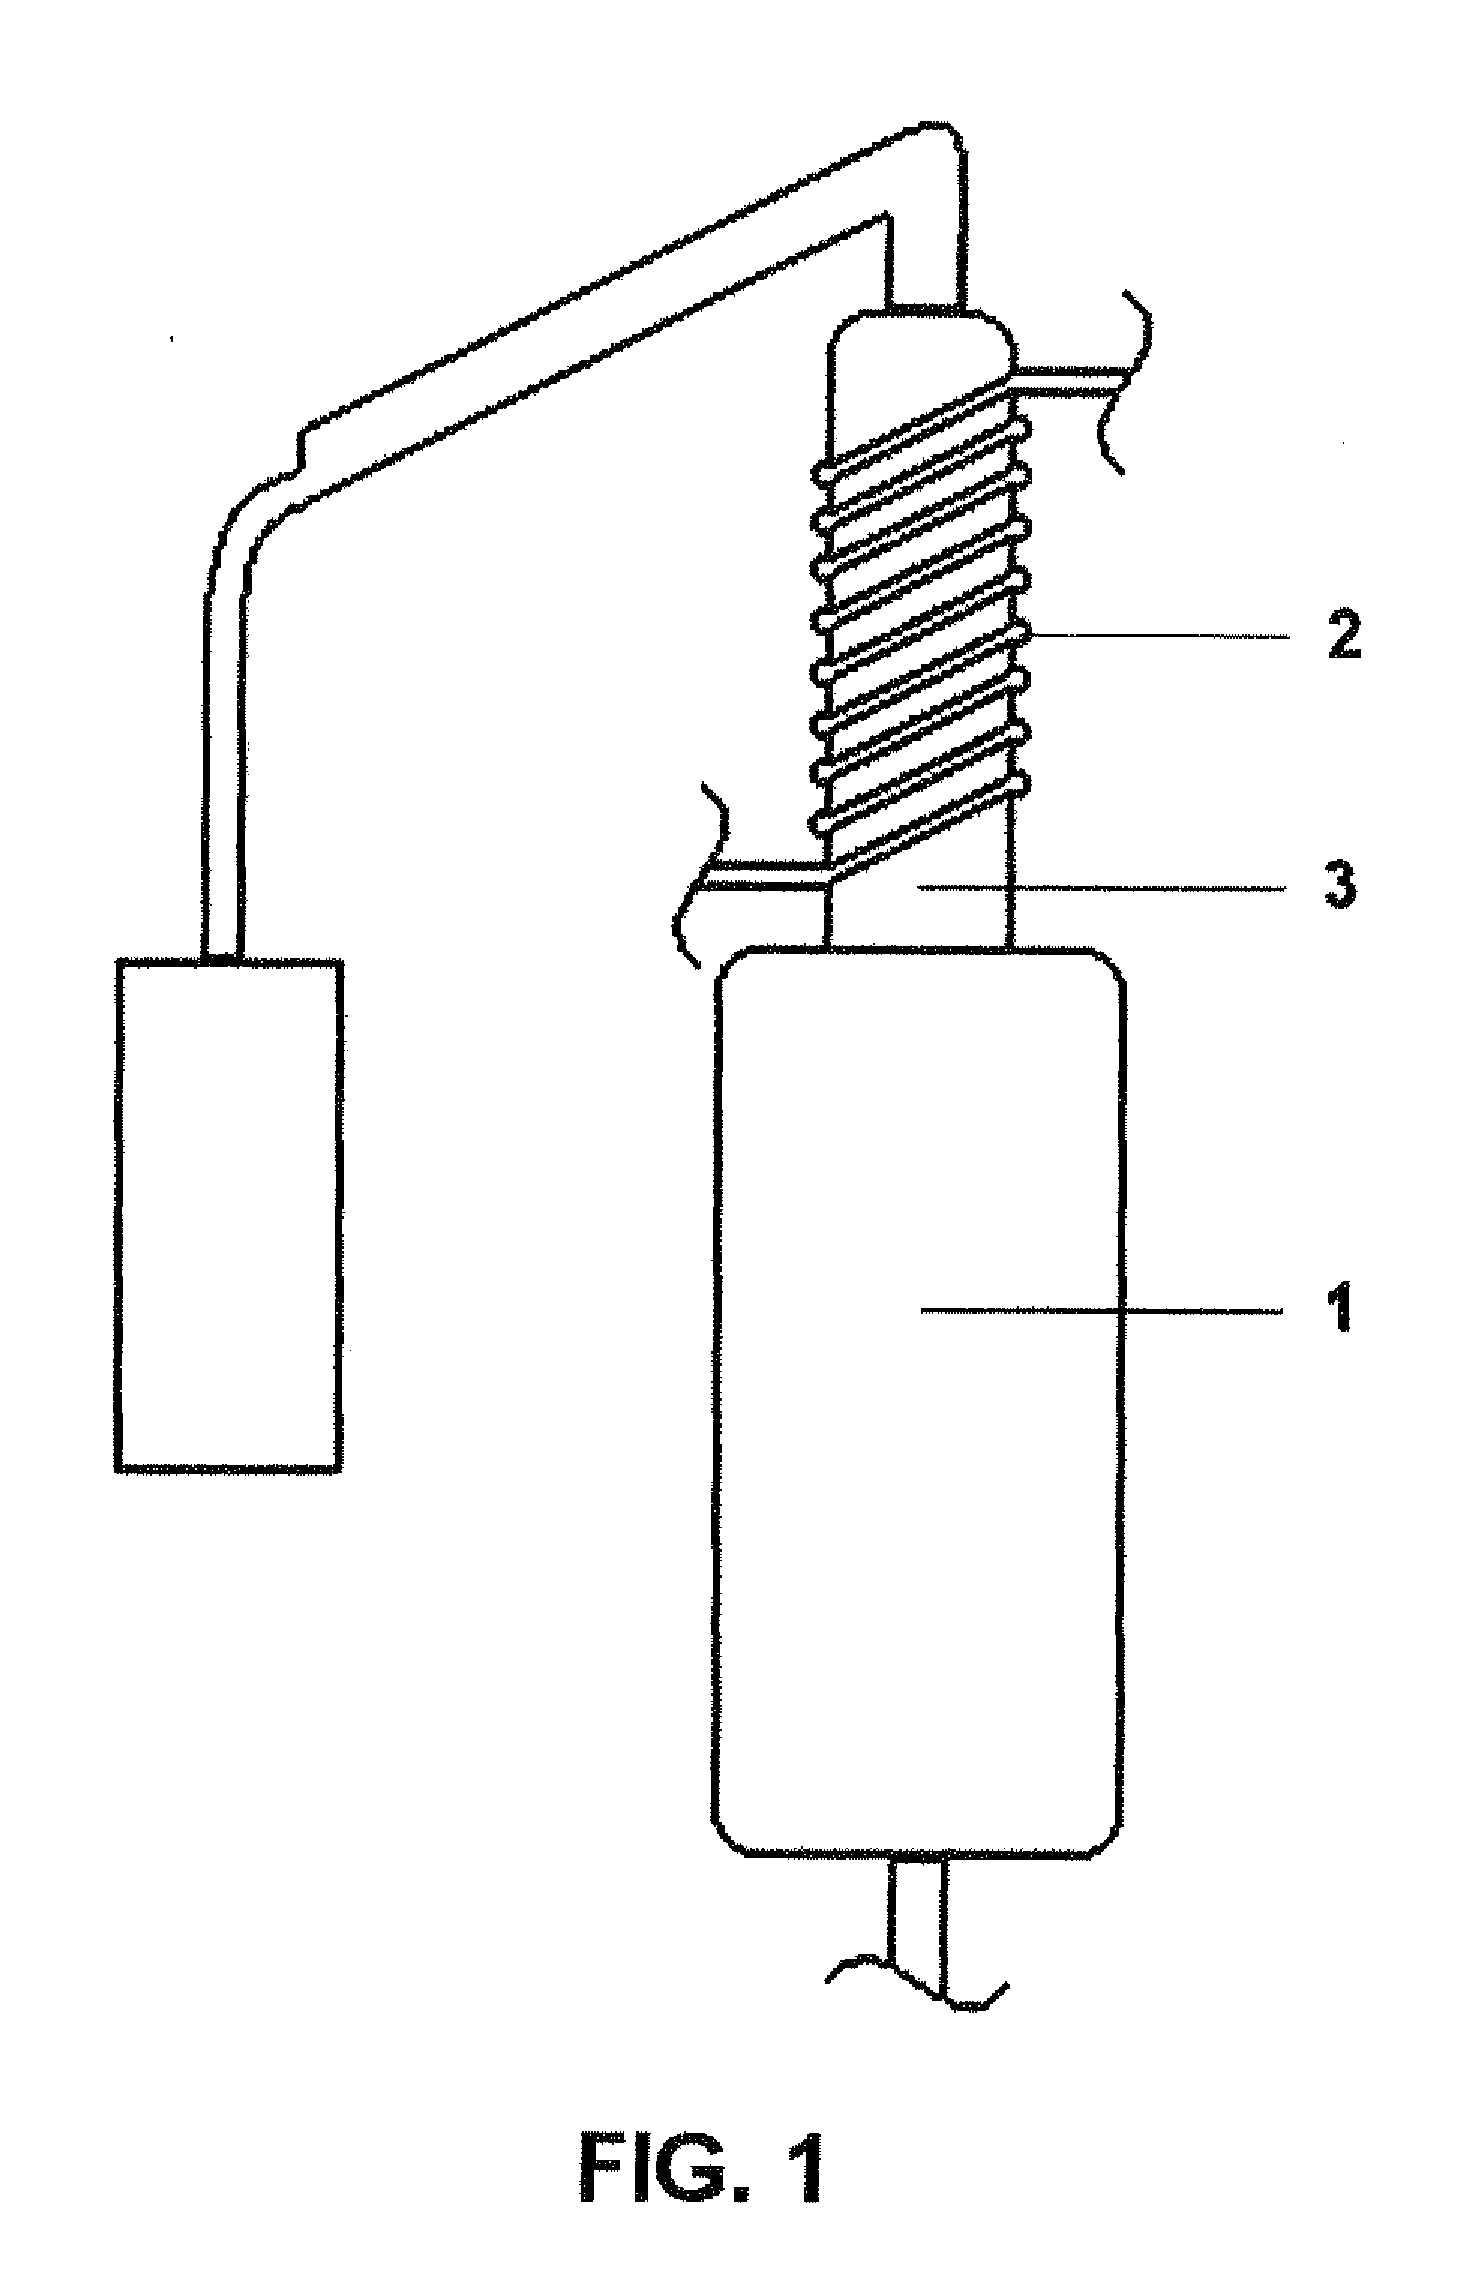 Process for the distillation of decanted oils for the production of petroleum pitches